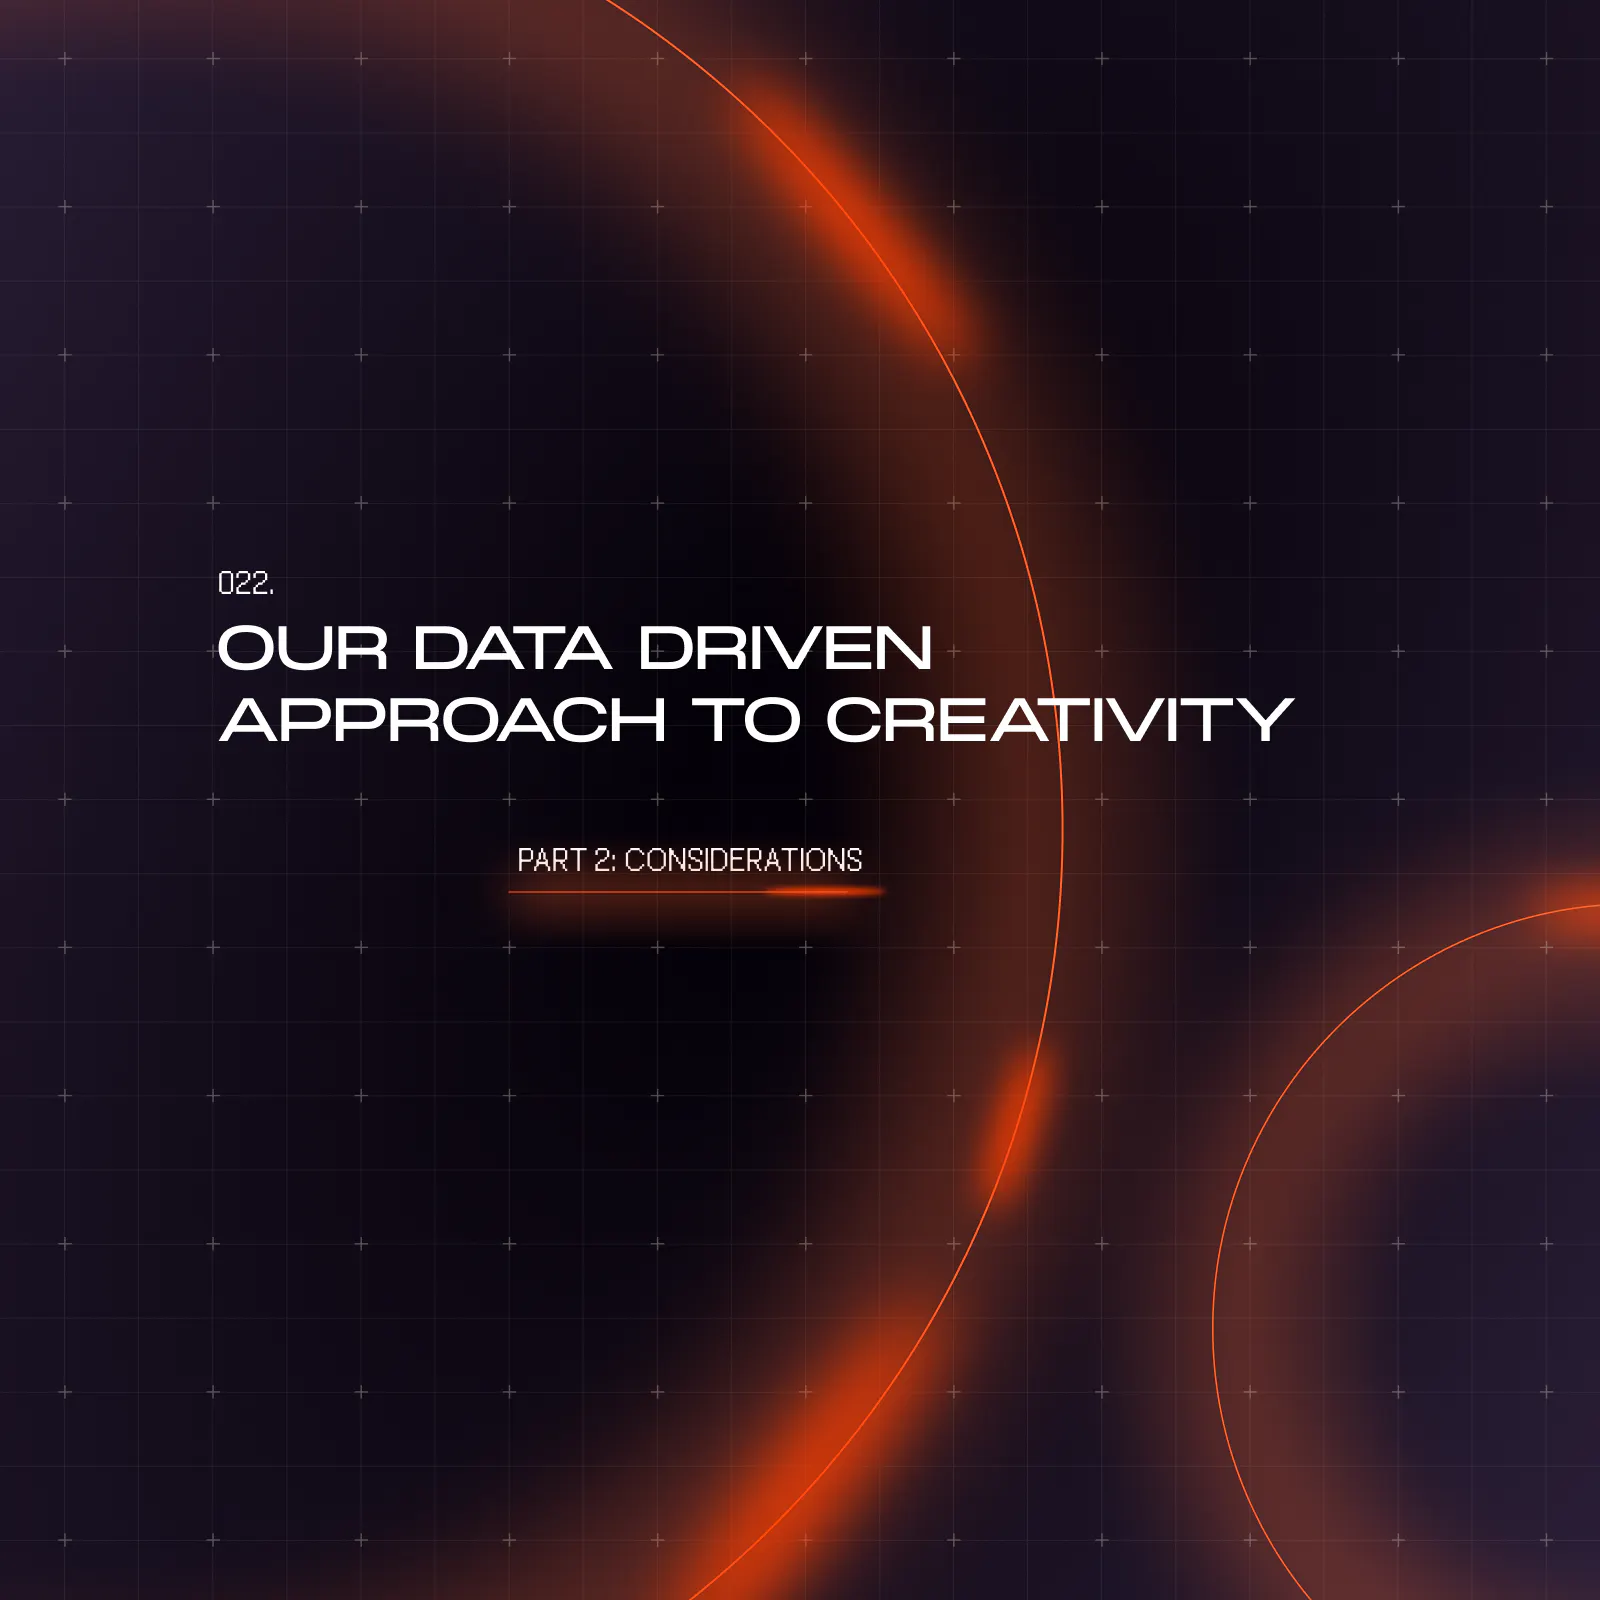 Black and orange background with text - Our Data Driven Approach to Creativity